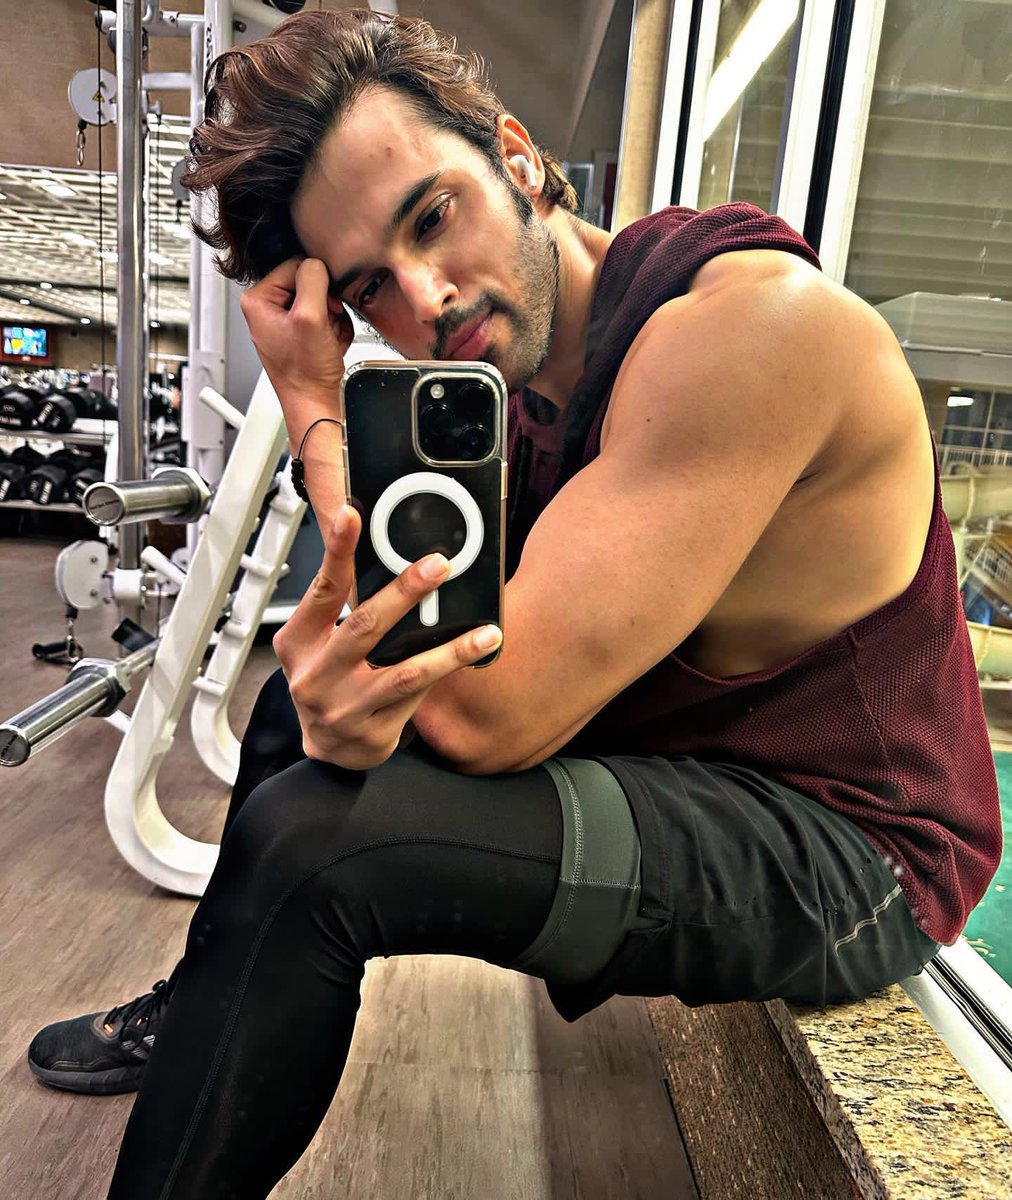 Instagram post of @LaghateParth 

Different times but same gym ,same pose aaaand same clothes …..almost !!☺️💪
#lifetimecanton #fitnessjourney #michigan #usadiaries 

#ParthSamthaan𓃵
#ParthSamthaan